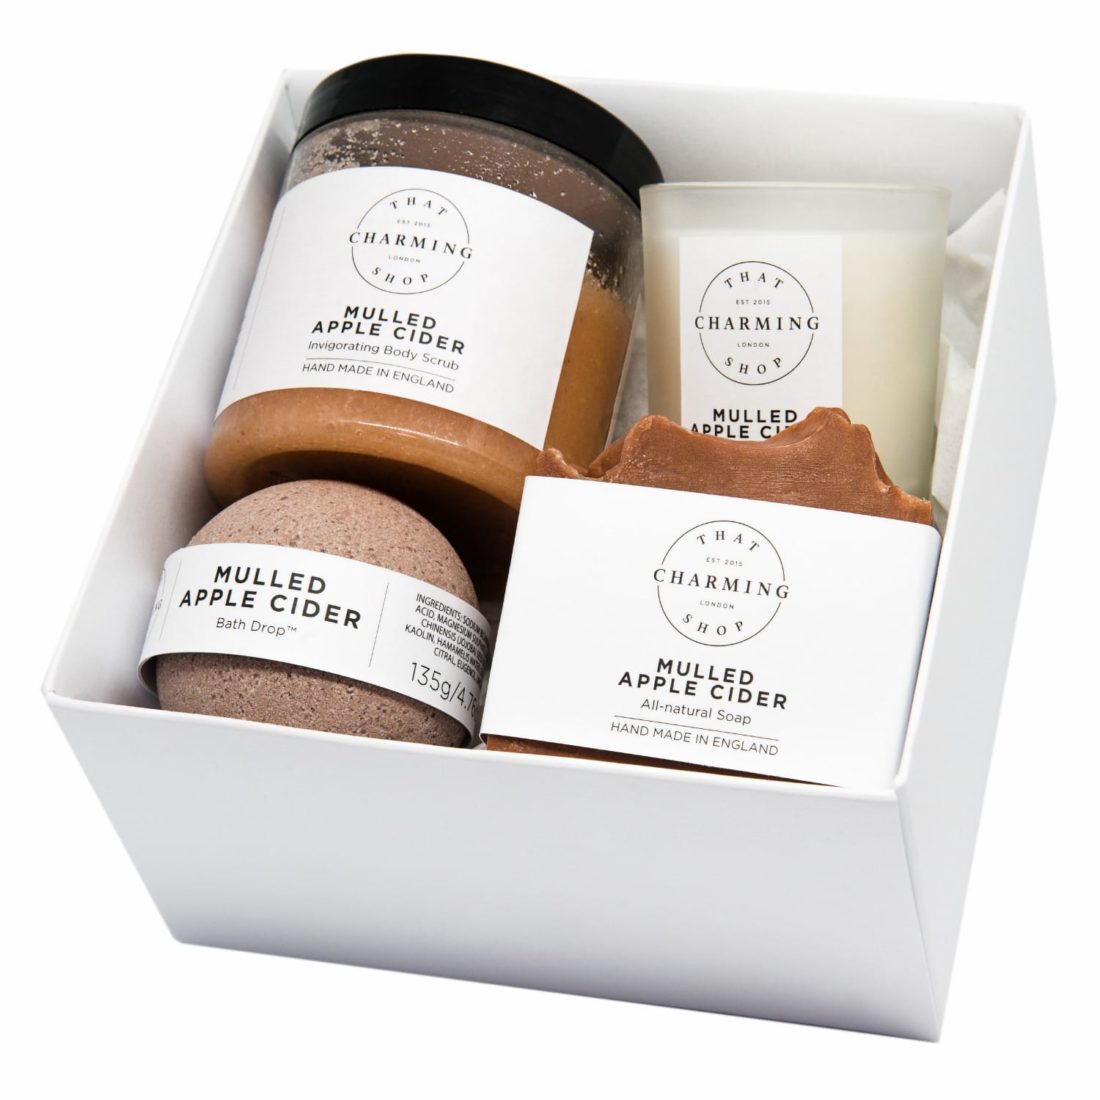 That Charming Shop Mulled Apple Cider Beauty Gift Box